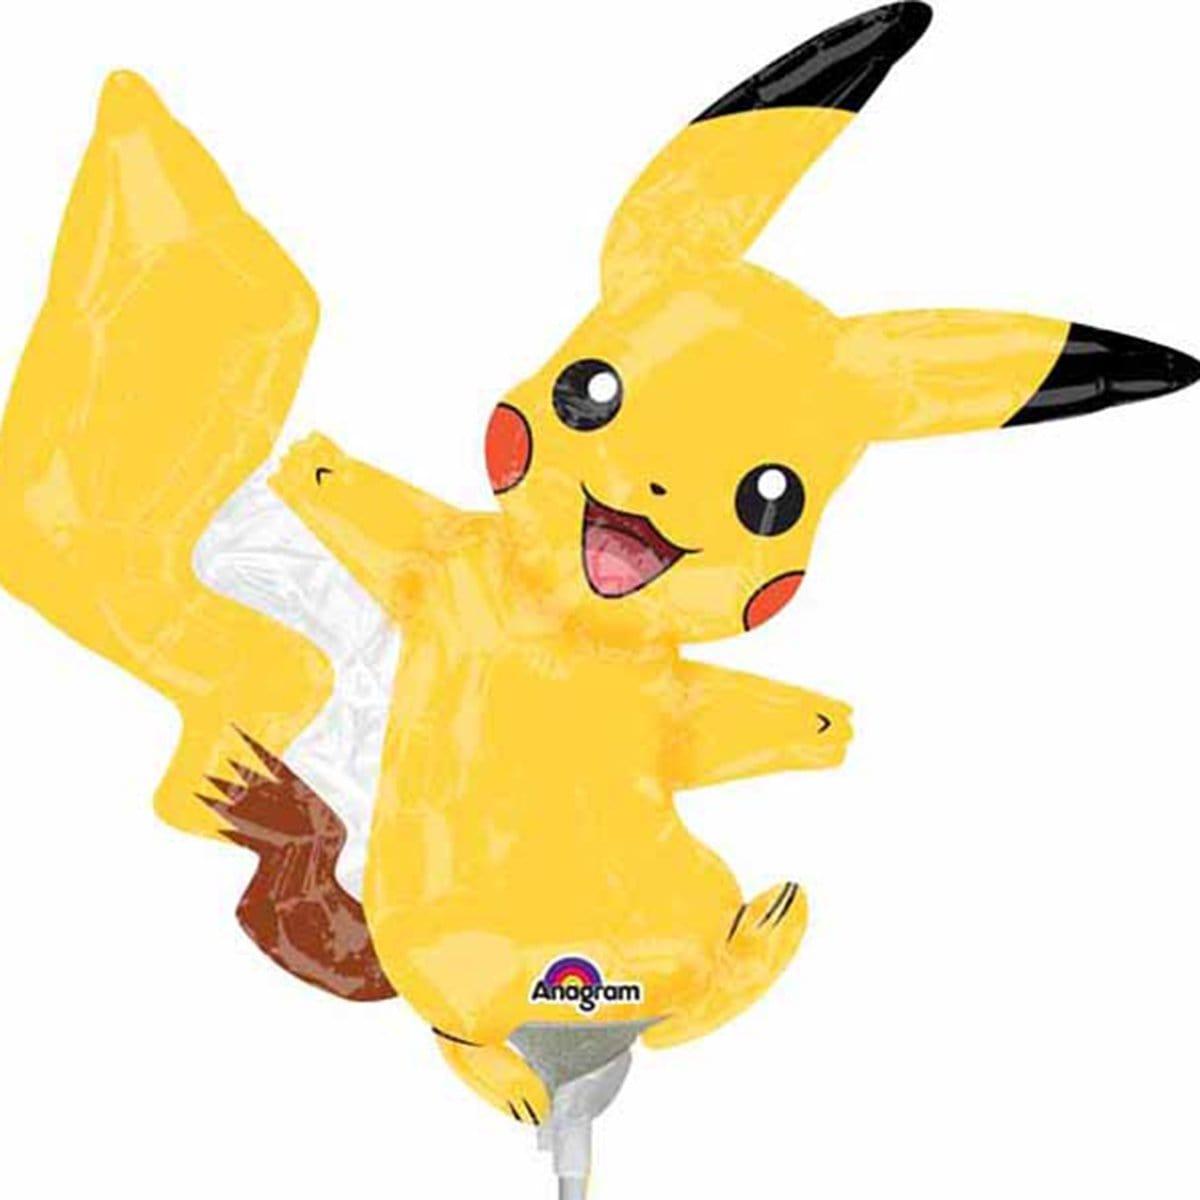 Buy Balloons Air Filled Pikachu Foil Balloon sold at Party Expert